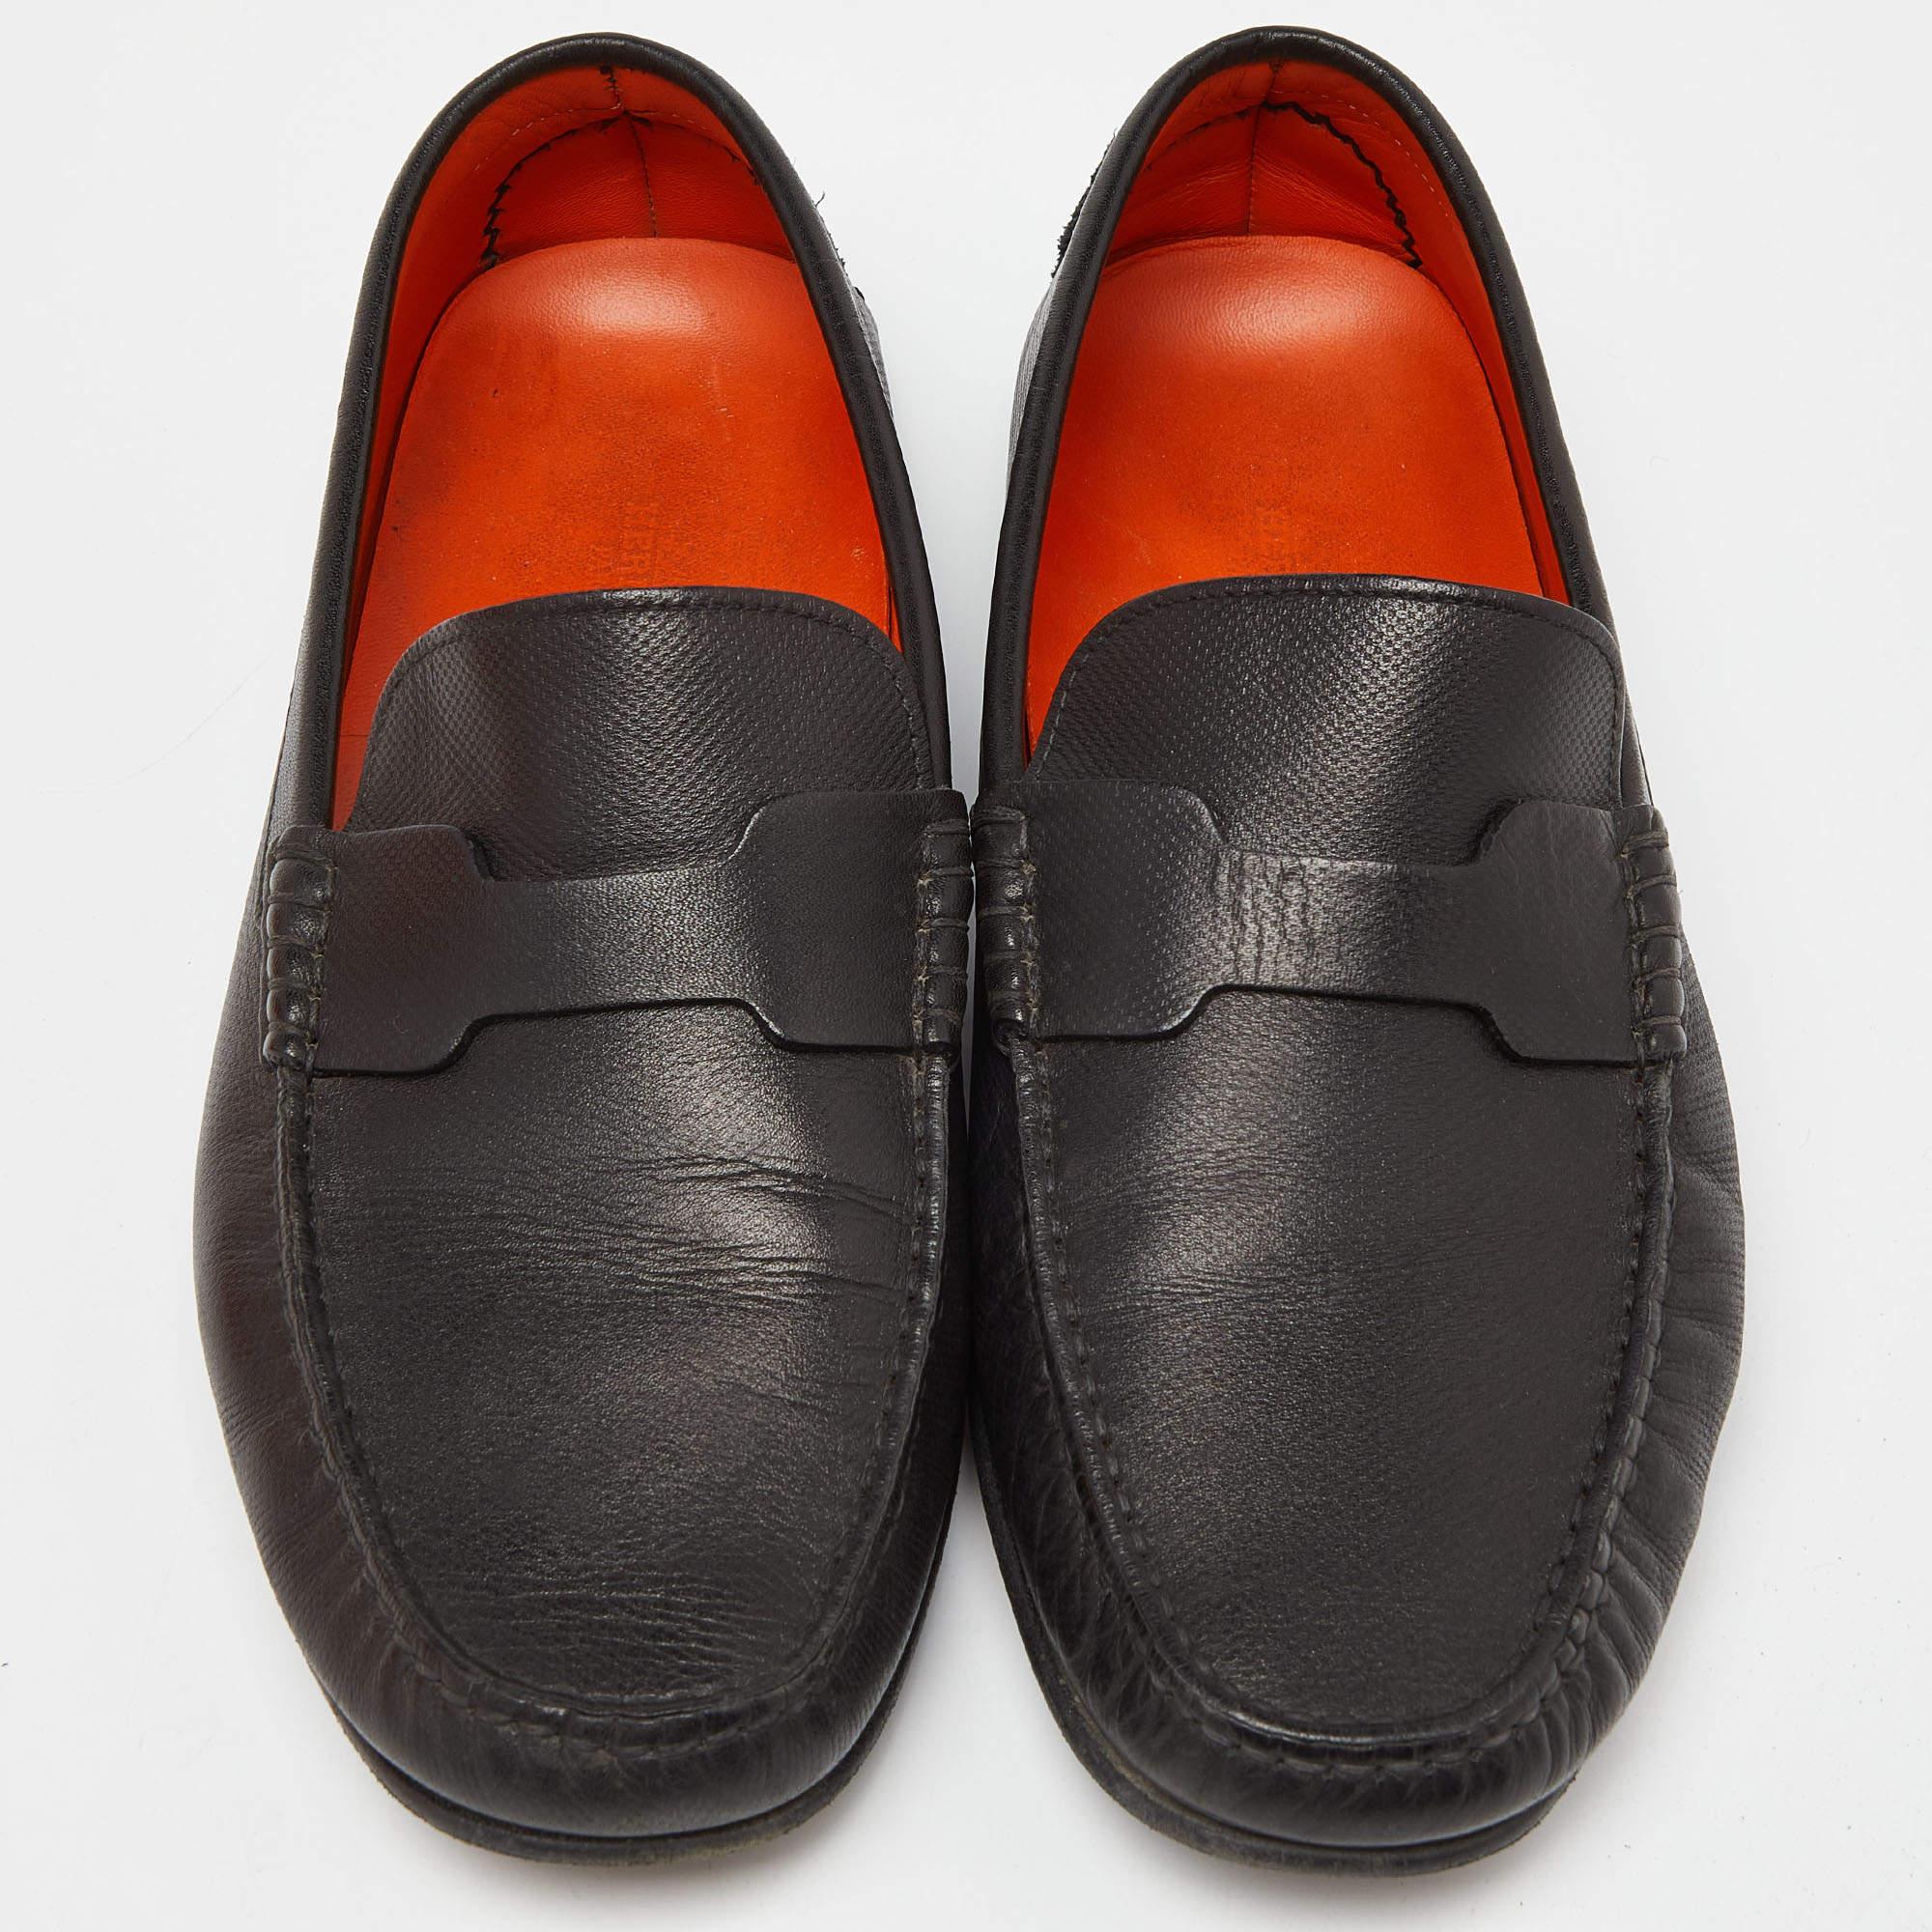 Practical, fashionable, and durable—these designer loafers are carefully built to be fine companions to your everyday style. They come made using the best materials to be a prized buy.

Includes
Original Dustbag, Original Box, Info Booklet